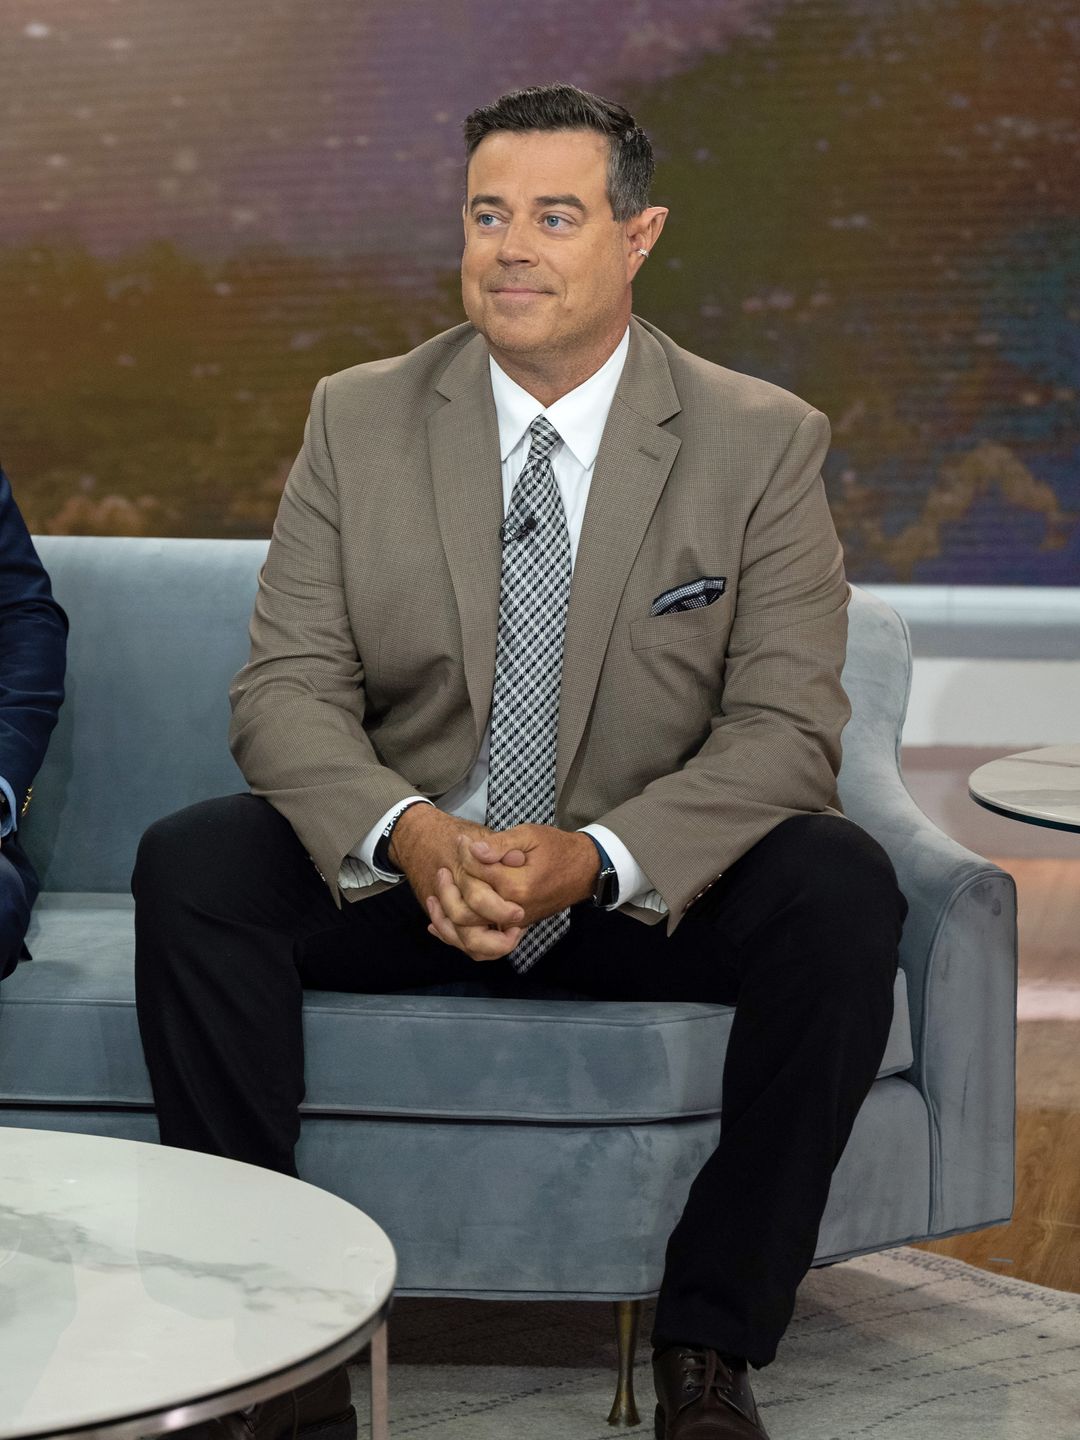 Carson Daly on the Today Show